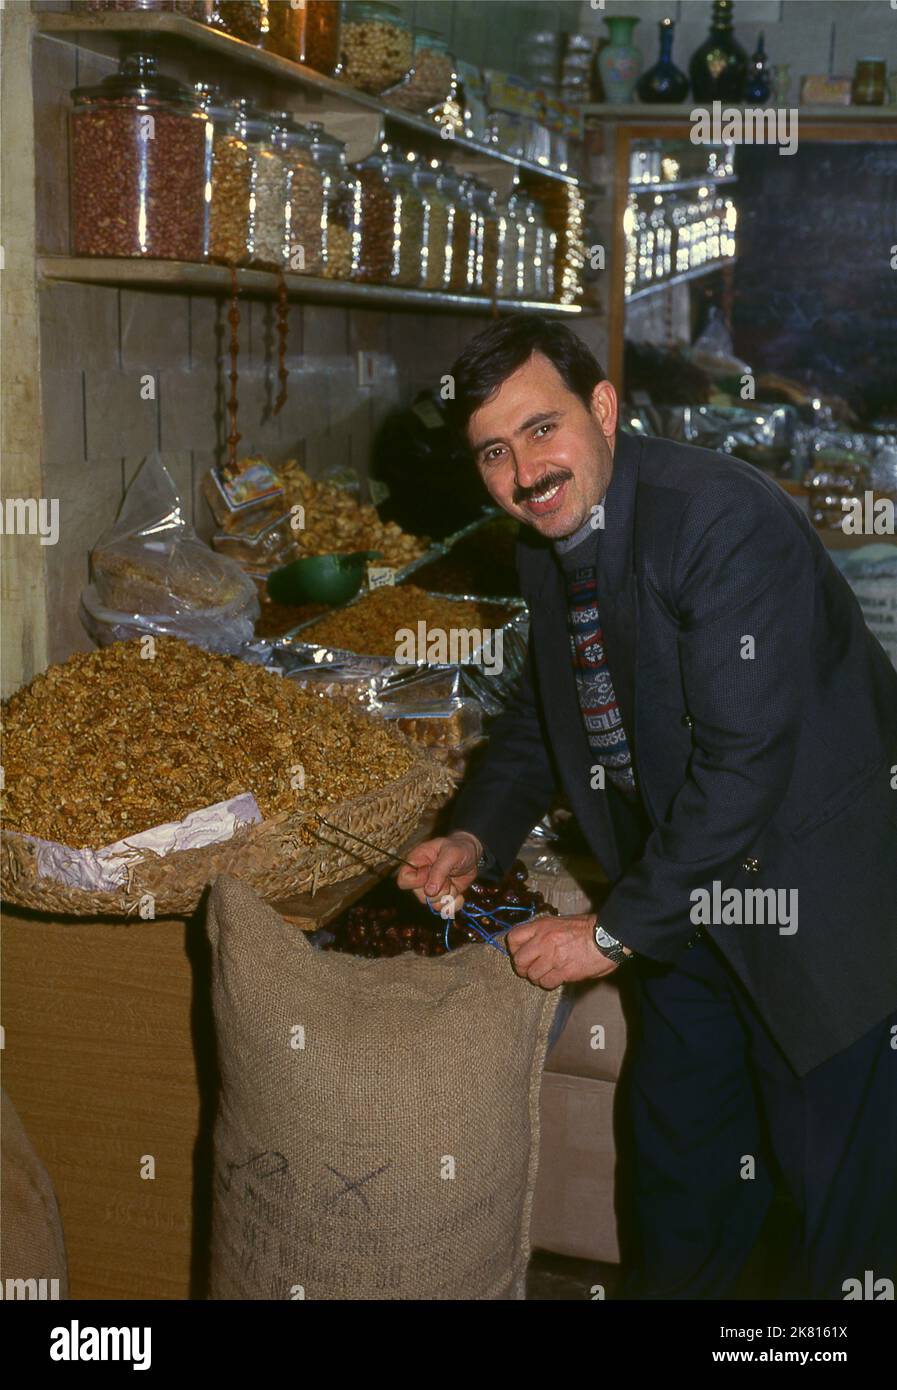 Syria: Nuts and dried fruit vendor in the ancient Great Bazaar, Aleppo (1997). Aleppo's Great Bazaar (in Arabic, suq or souq) was rebuilt first by the Egyptian Mamelukes who drove out the Mongols, and then, after 1516, by the Turks who incorporated Aleppo into the Ottoman Empire. During the Syrian Civil War, which started in 2011, Aleppo's historic suqs suffered serious damage.  Aleppo, the second city of Syria is possibly the longest continually inhabited settlement in the world. Its Arabic name, Halab, is mentioned in Semitic texts of the third millennium BCE. Stock Photo